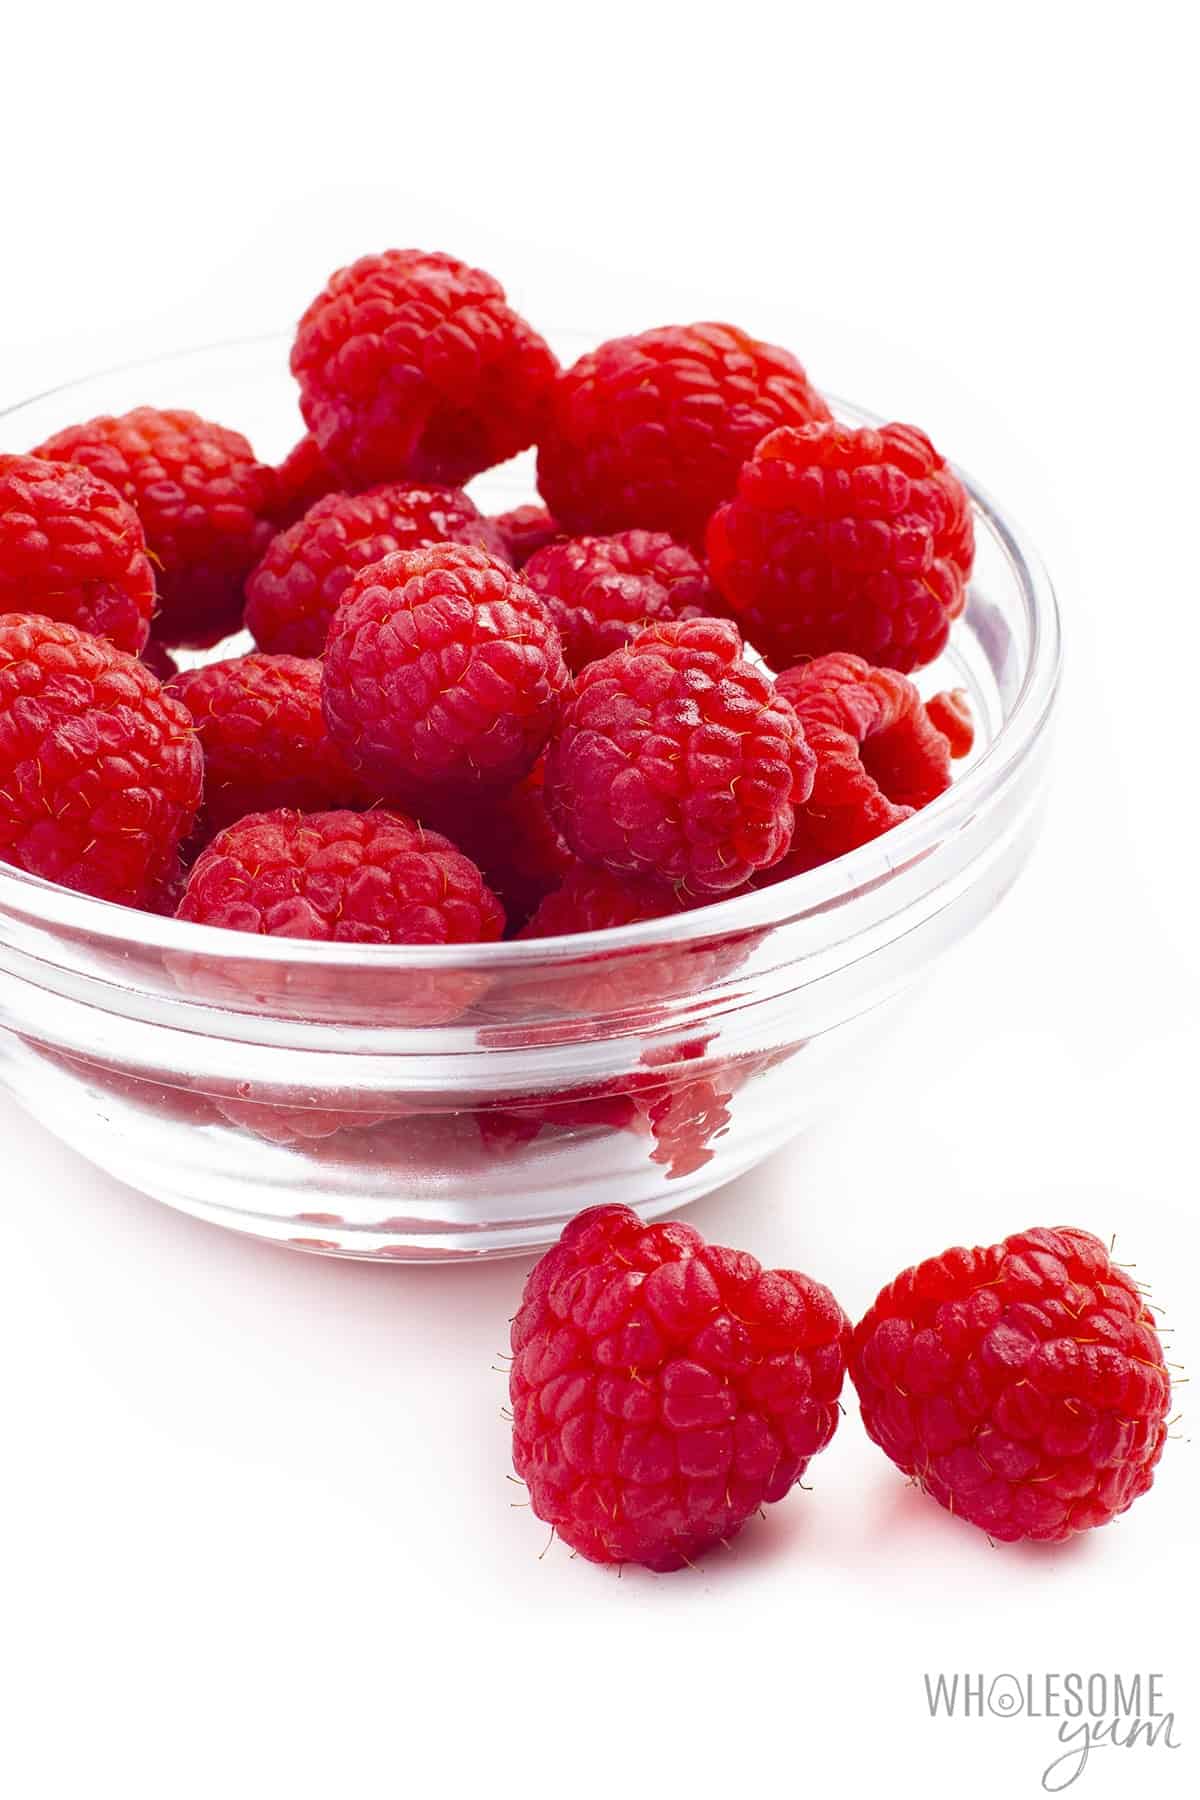 Are raspberries keto? These whole, raw raspberries could be keto friendly.